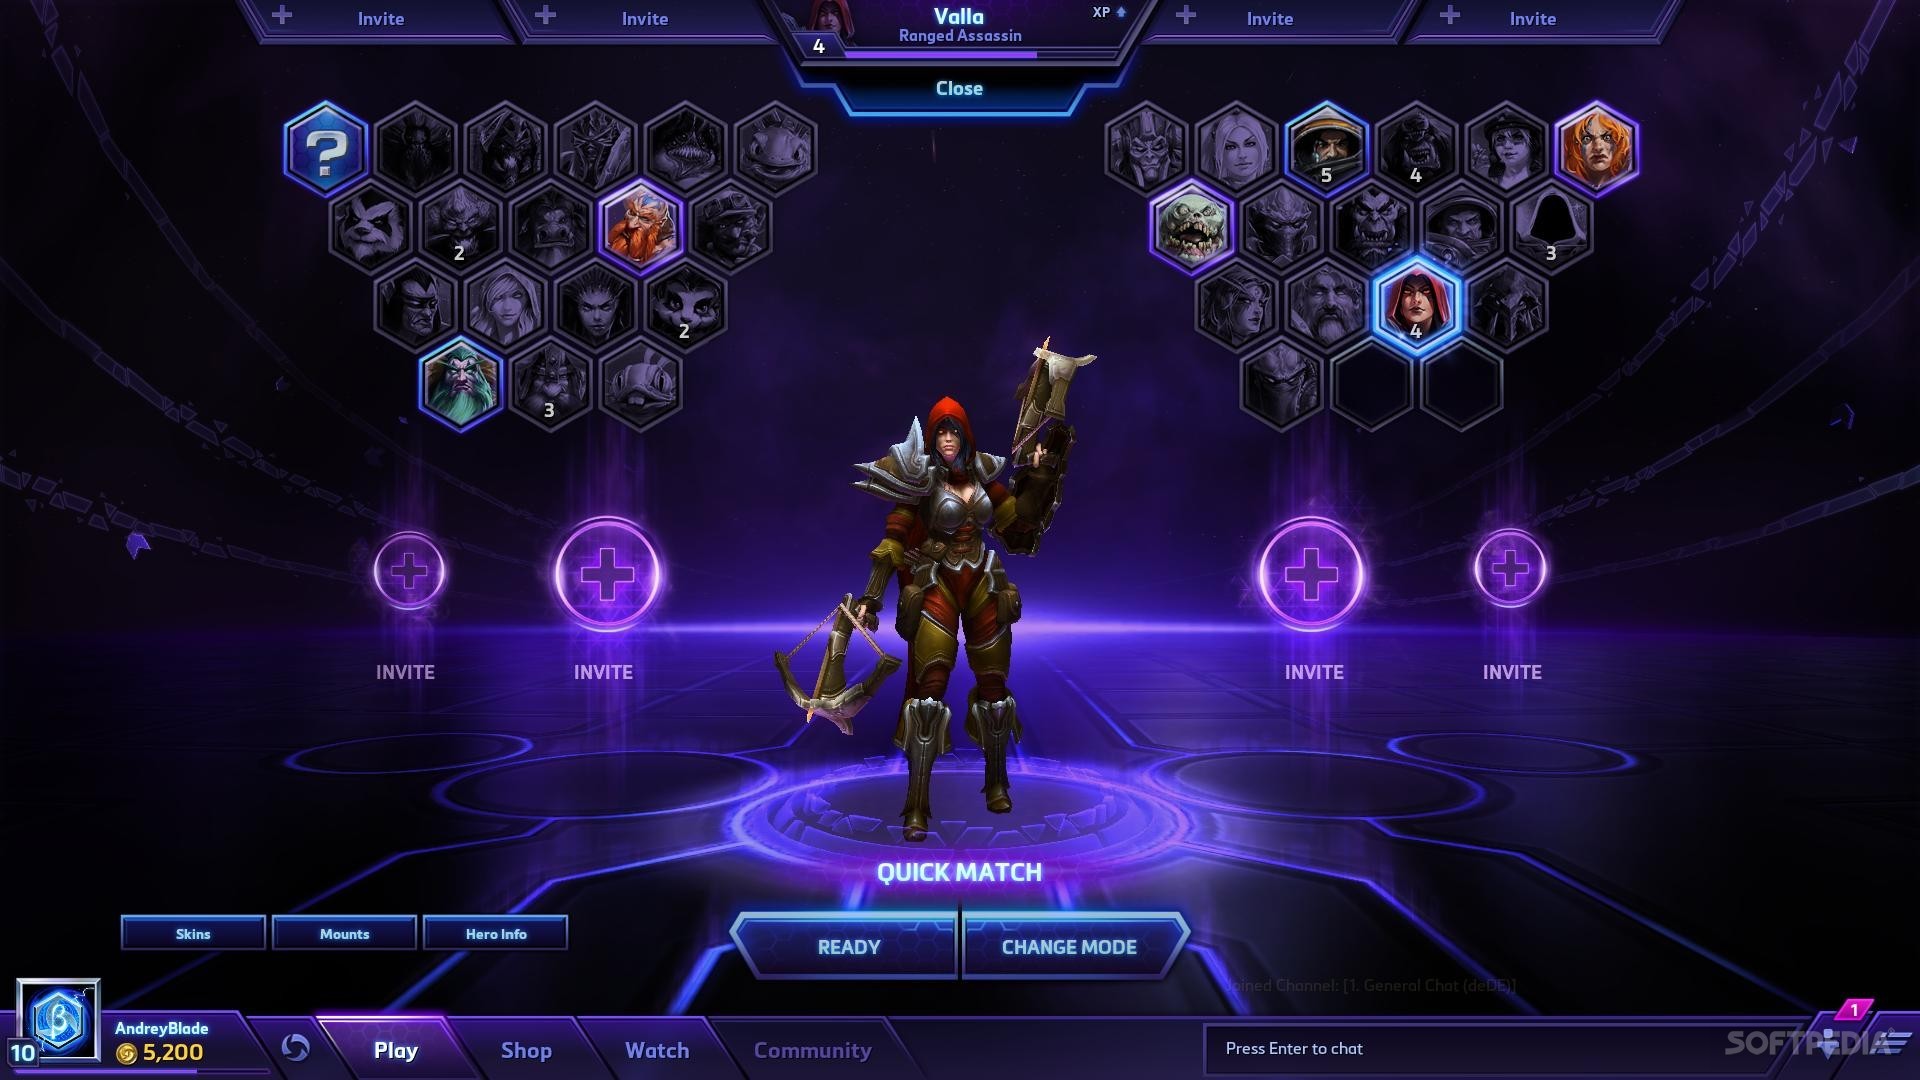 Heroes Of The Storm Just Got Patched With New Server Selection Options